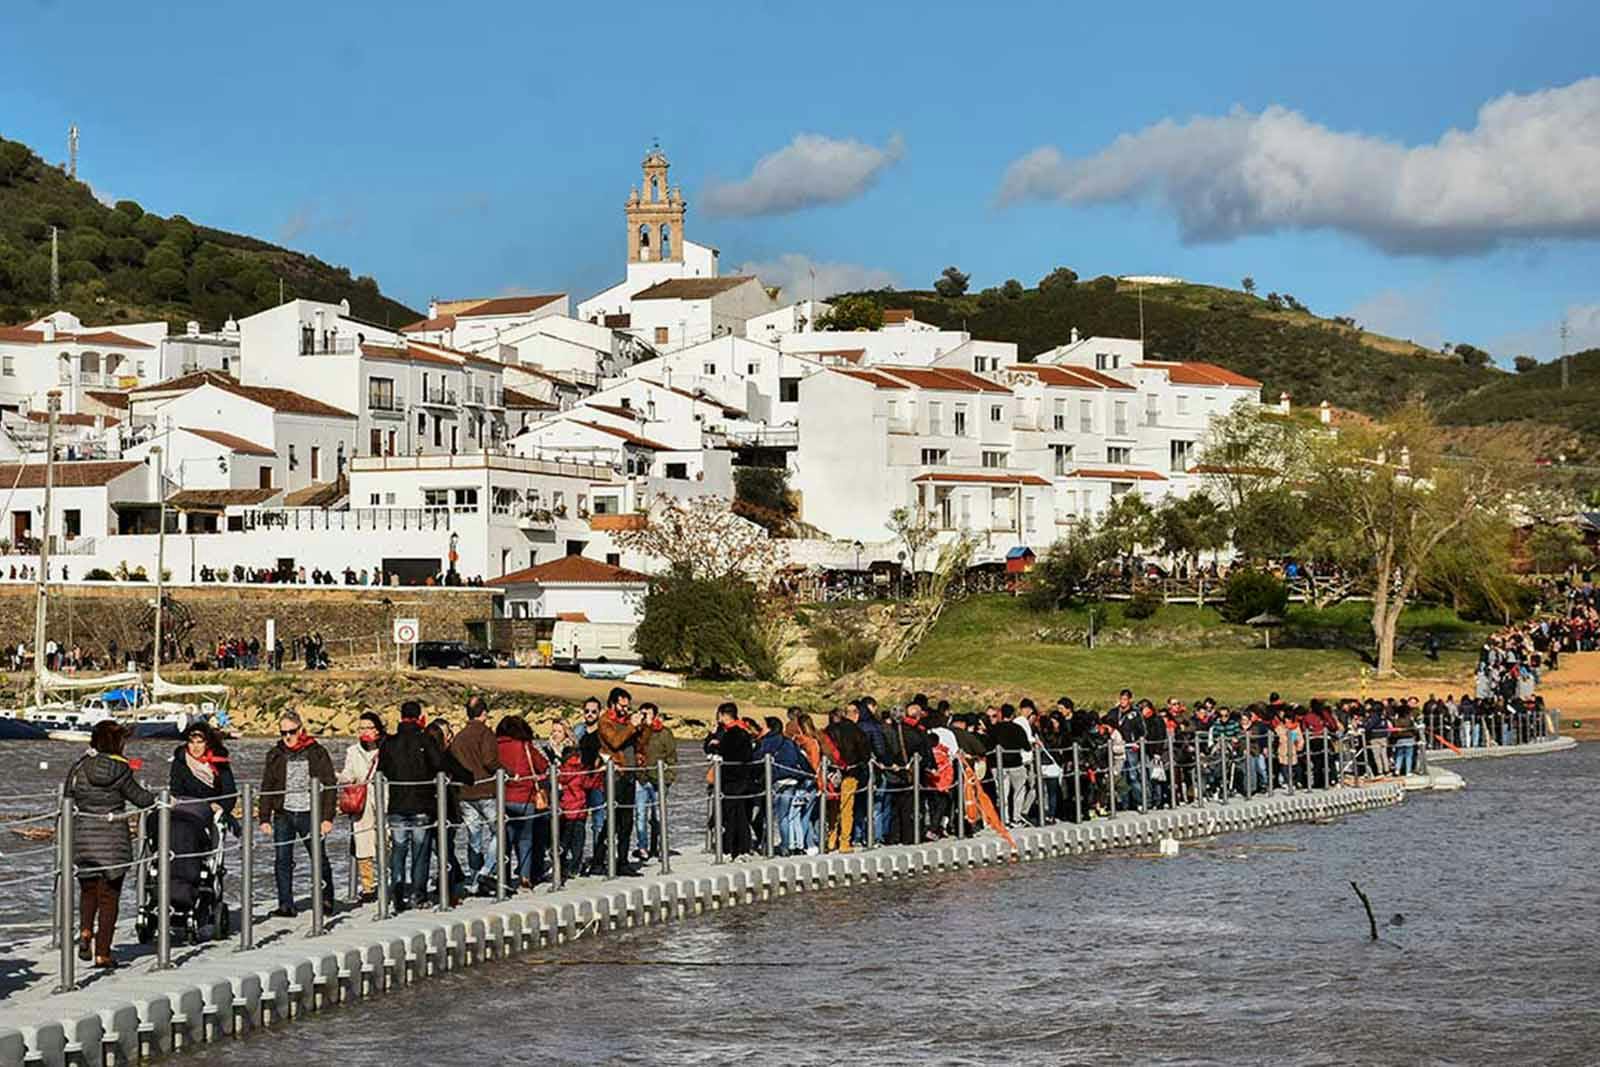 Visitors of the Contraband Festival crossing the Guadiana river during the best family event in the Algarve.